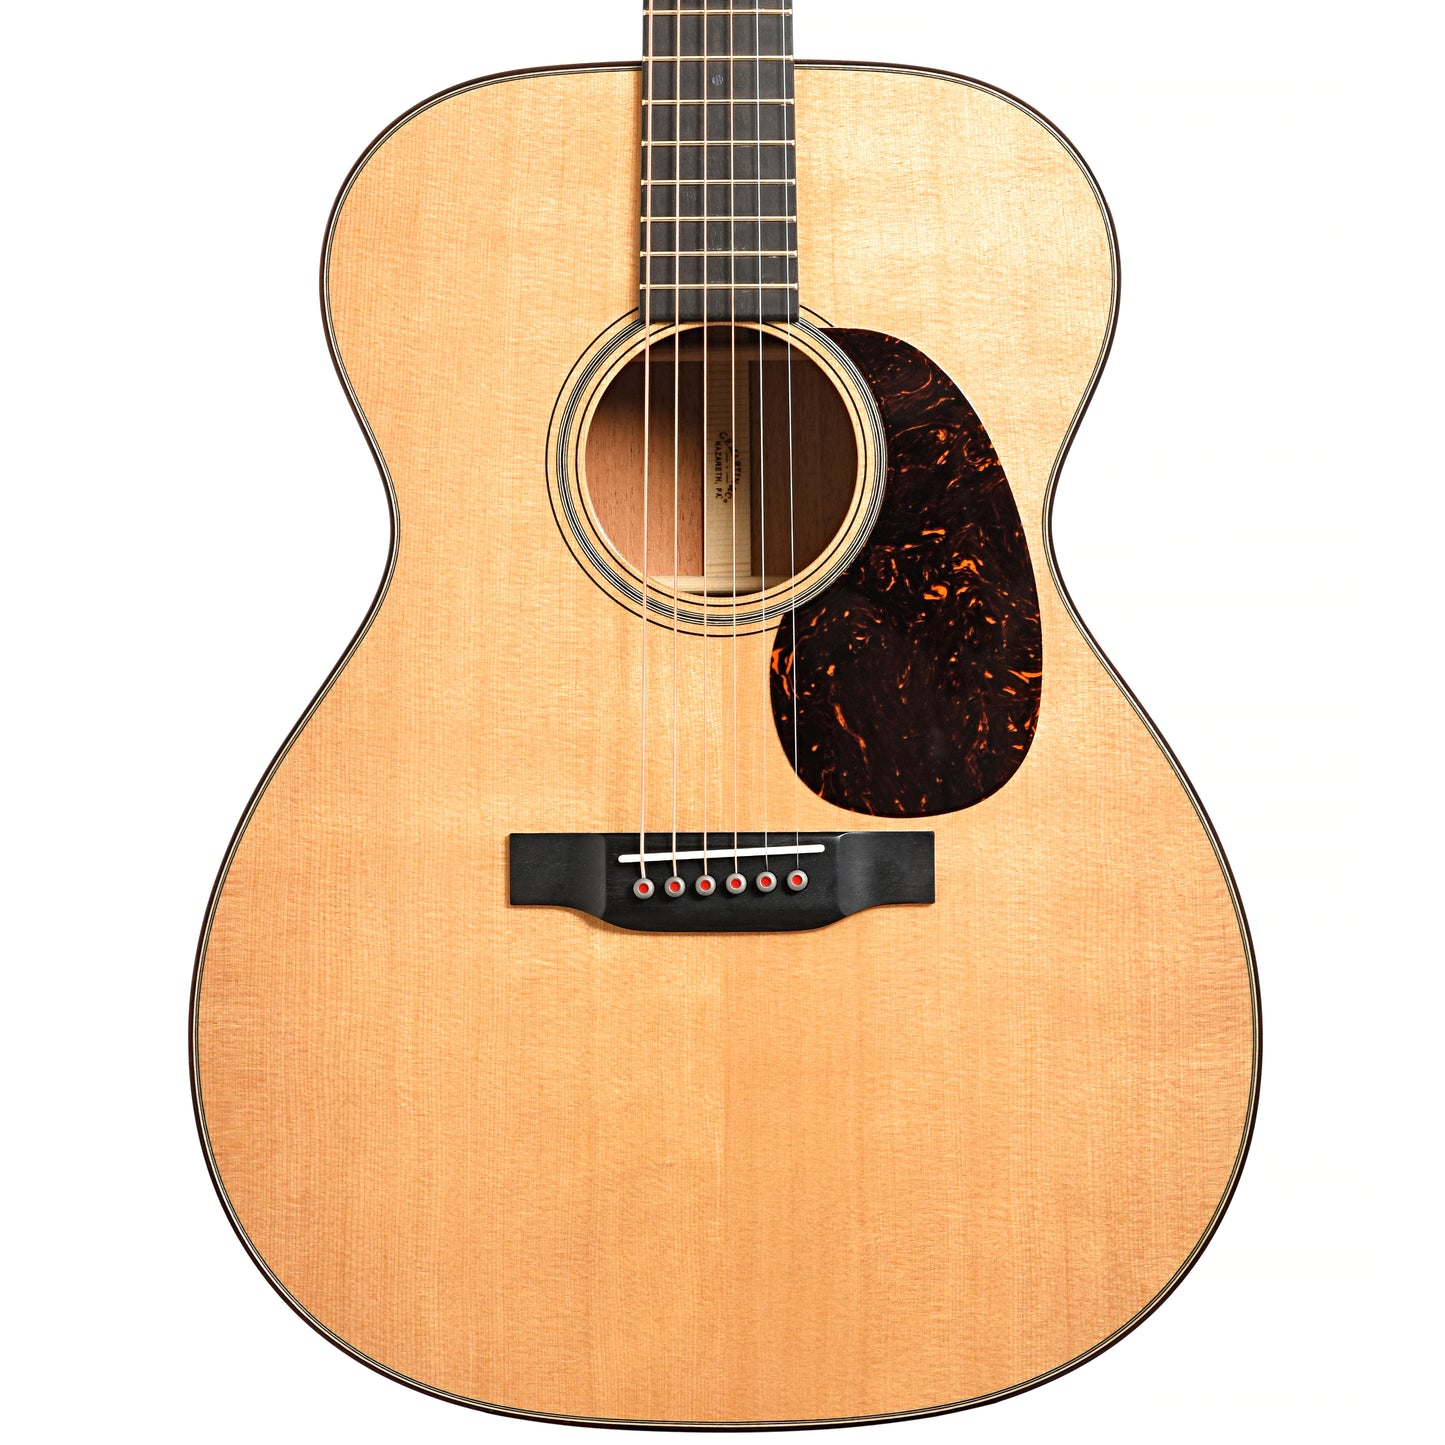 Image 13 of Martin 000-18 Modern Deluxe Guitar & Case- SKU# 00018MDLX : Product Type Flat-top Guitars : Elderly Instruments